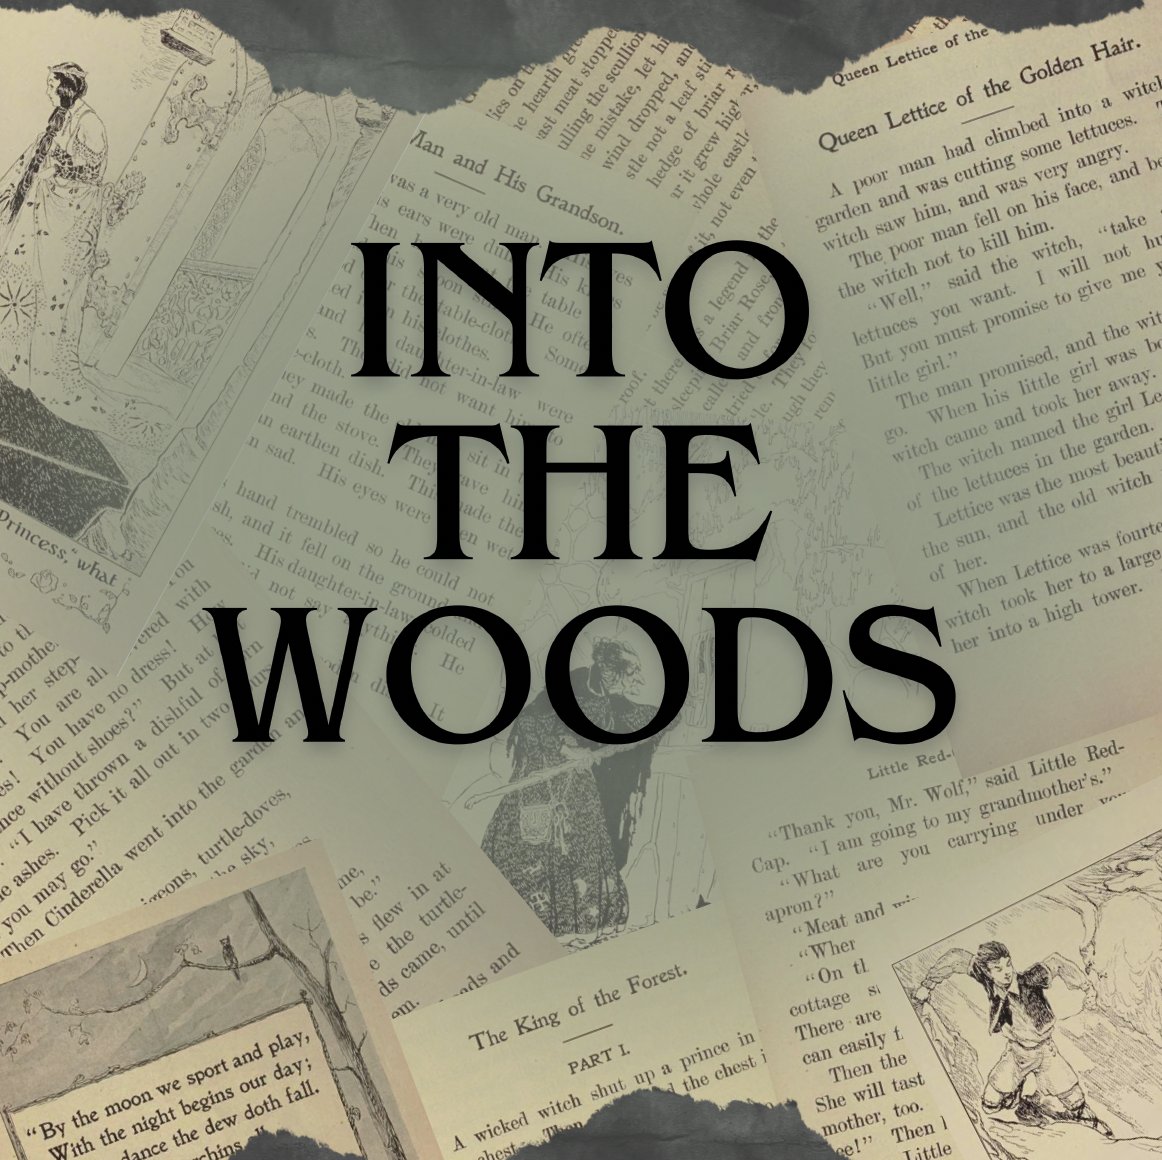 Auditions will be held May 19 and 20 for College/Community Summer Theatre's mid-July production of 'Into the Woods.' #WeAreDubc #experiencewc
wilmington.edu/news/auditions…